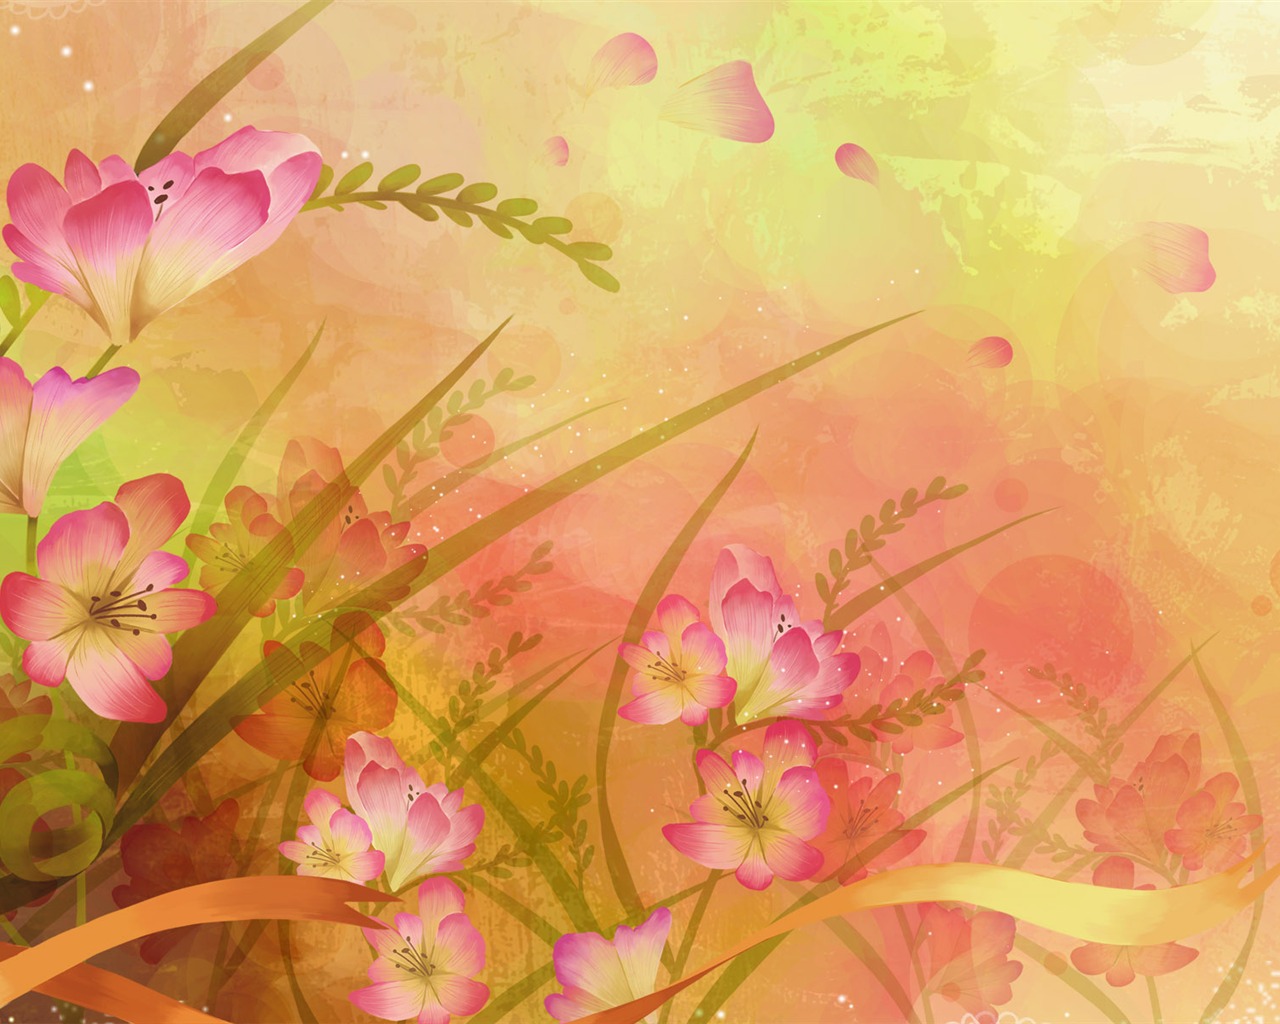 Synthetic Wallpaper Colorful Flower #40 - 1280x1024